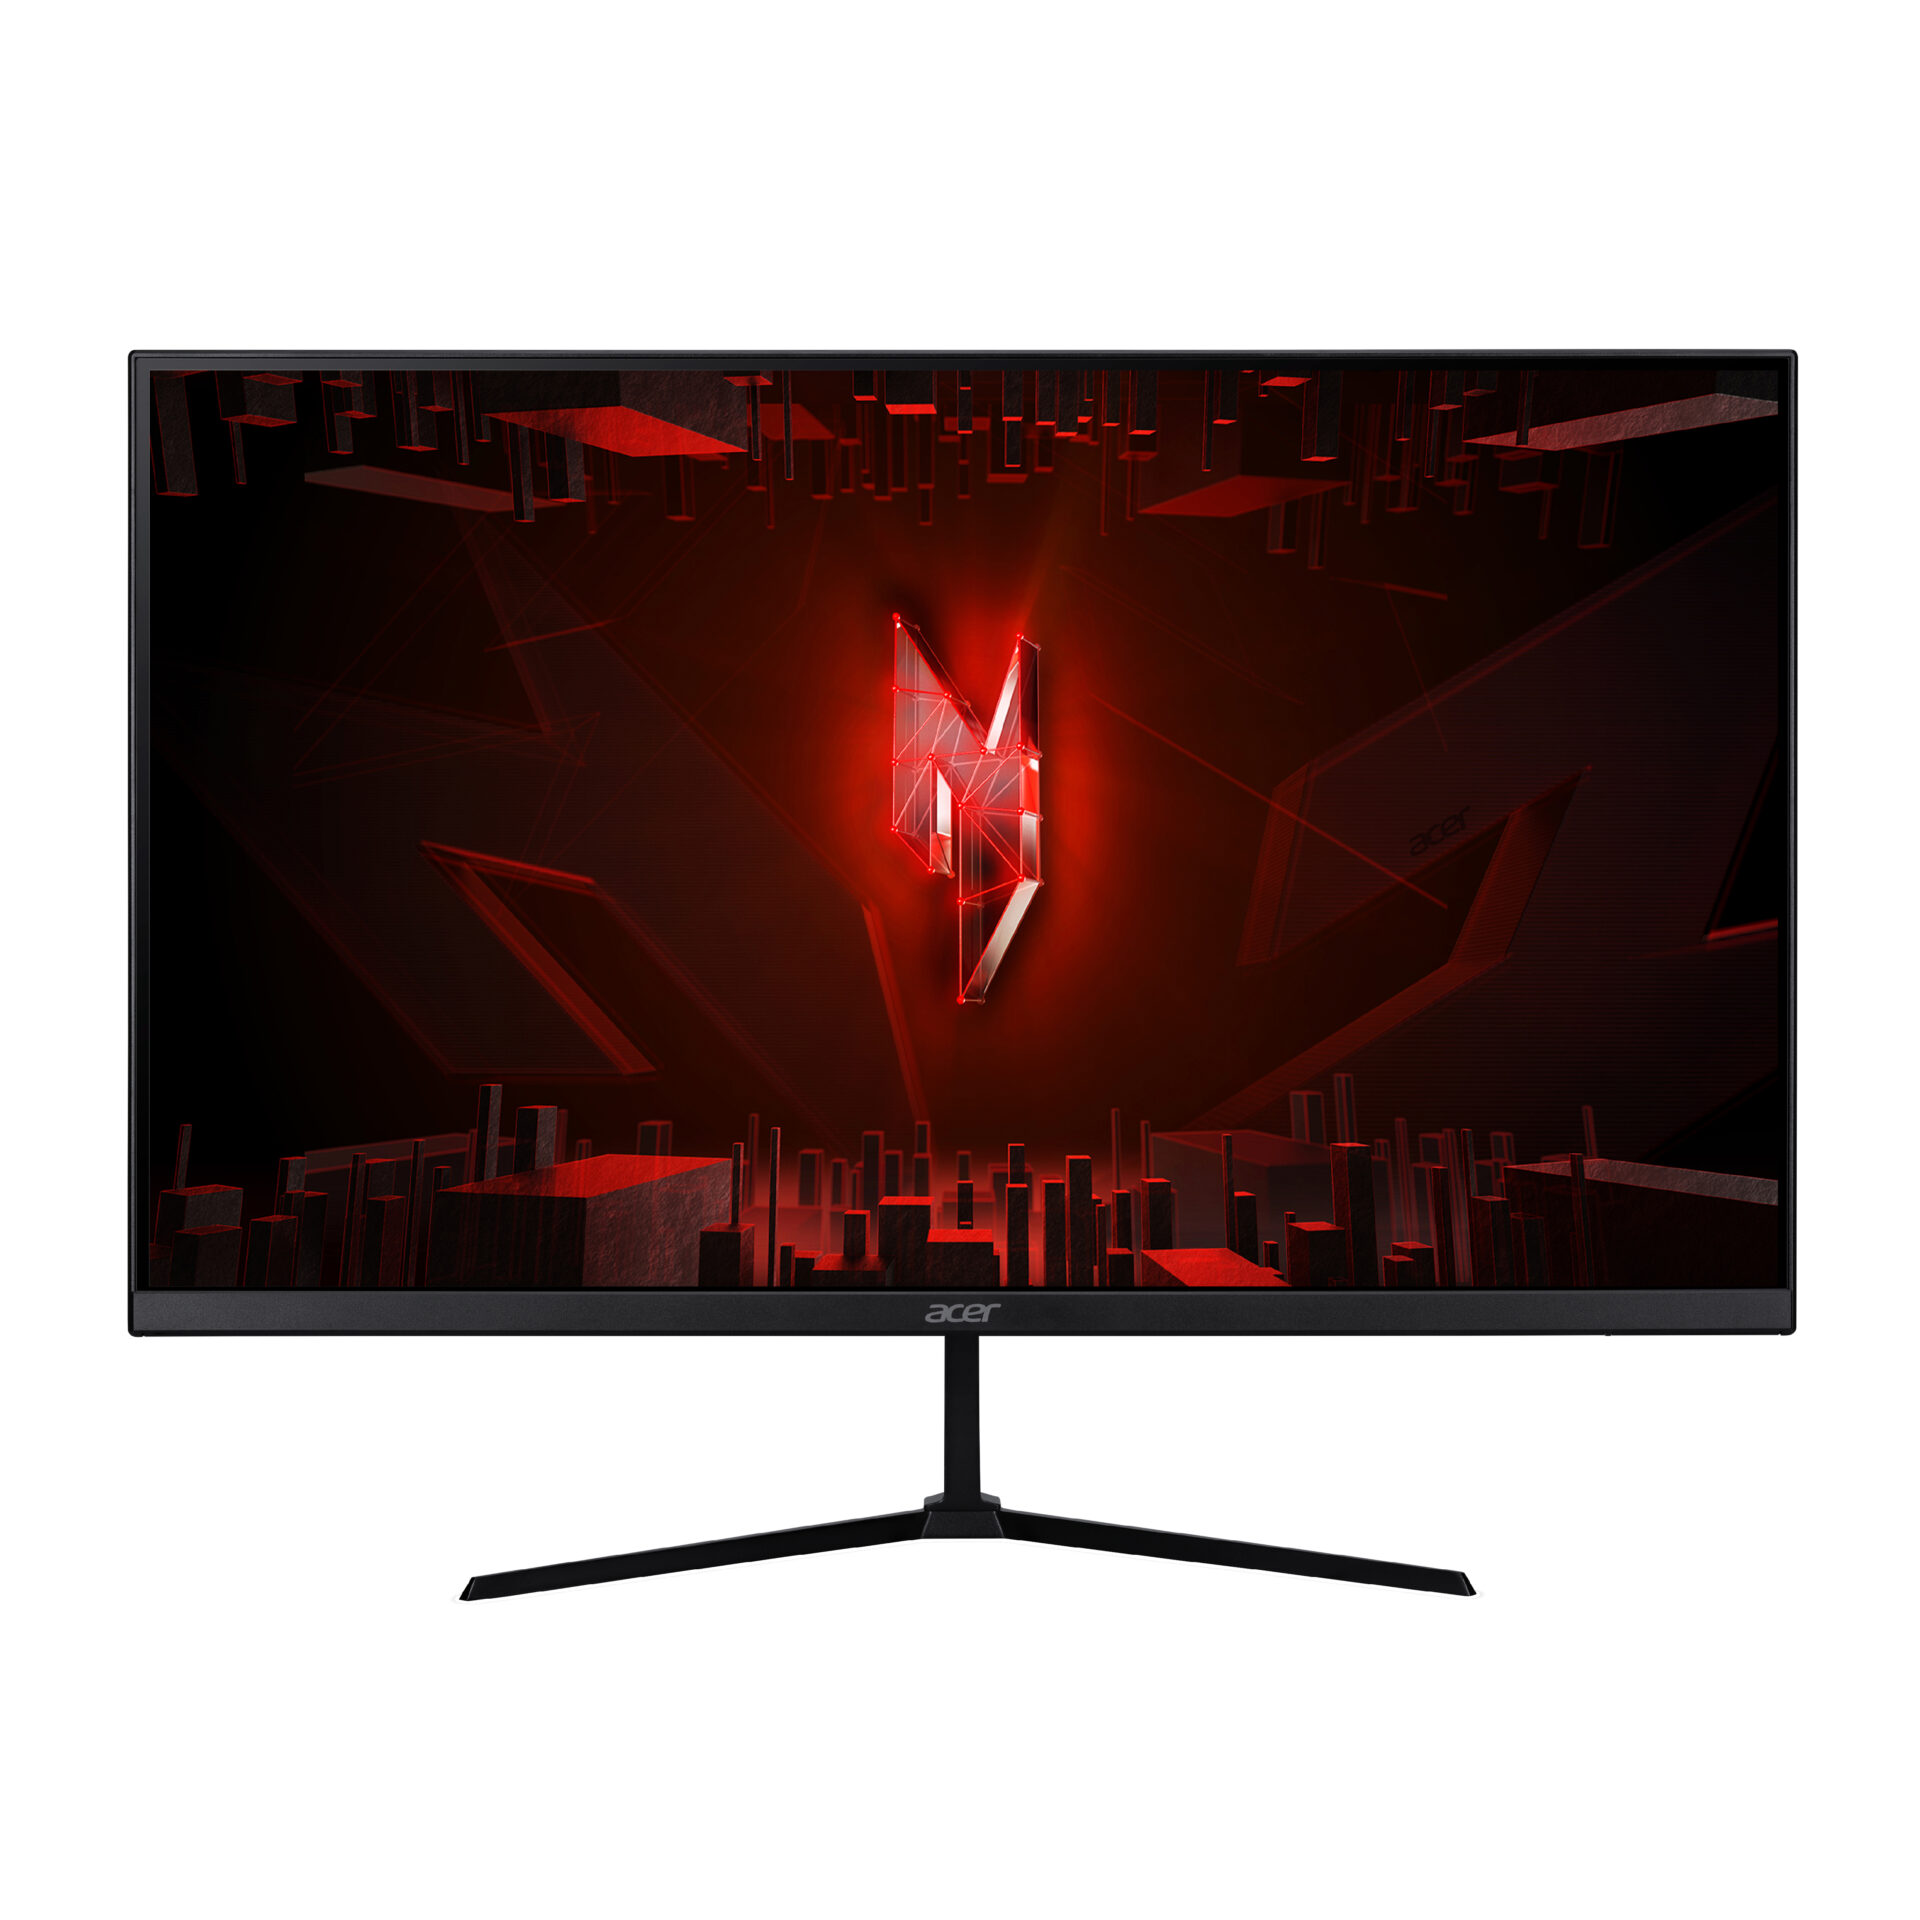 Acer unveils a 27-inch gaming monitor with 180Hz refresh fee for RM589